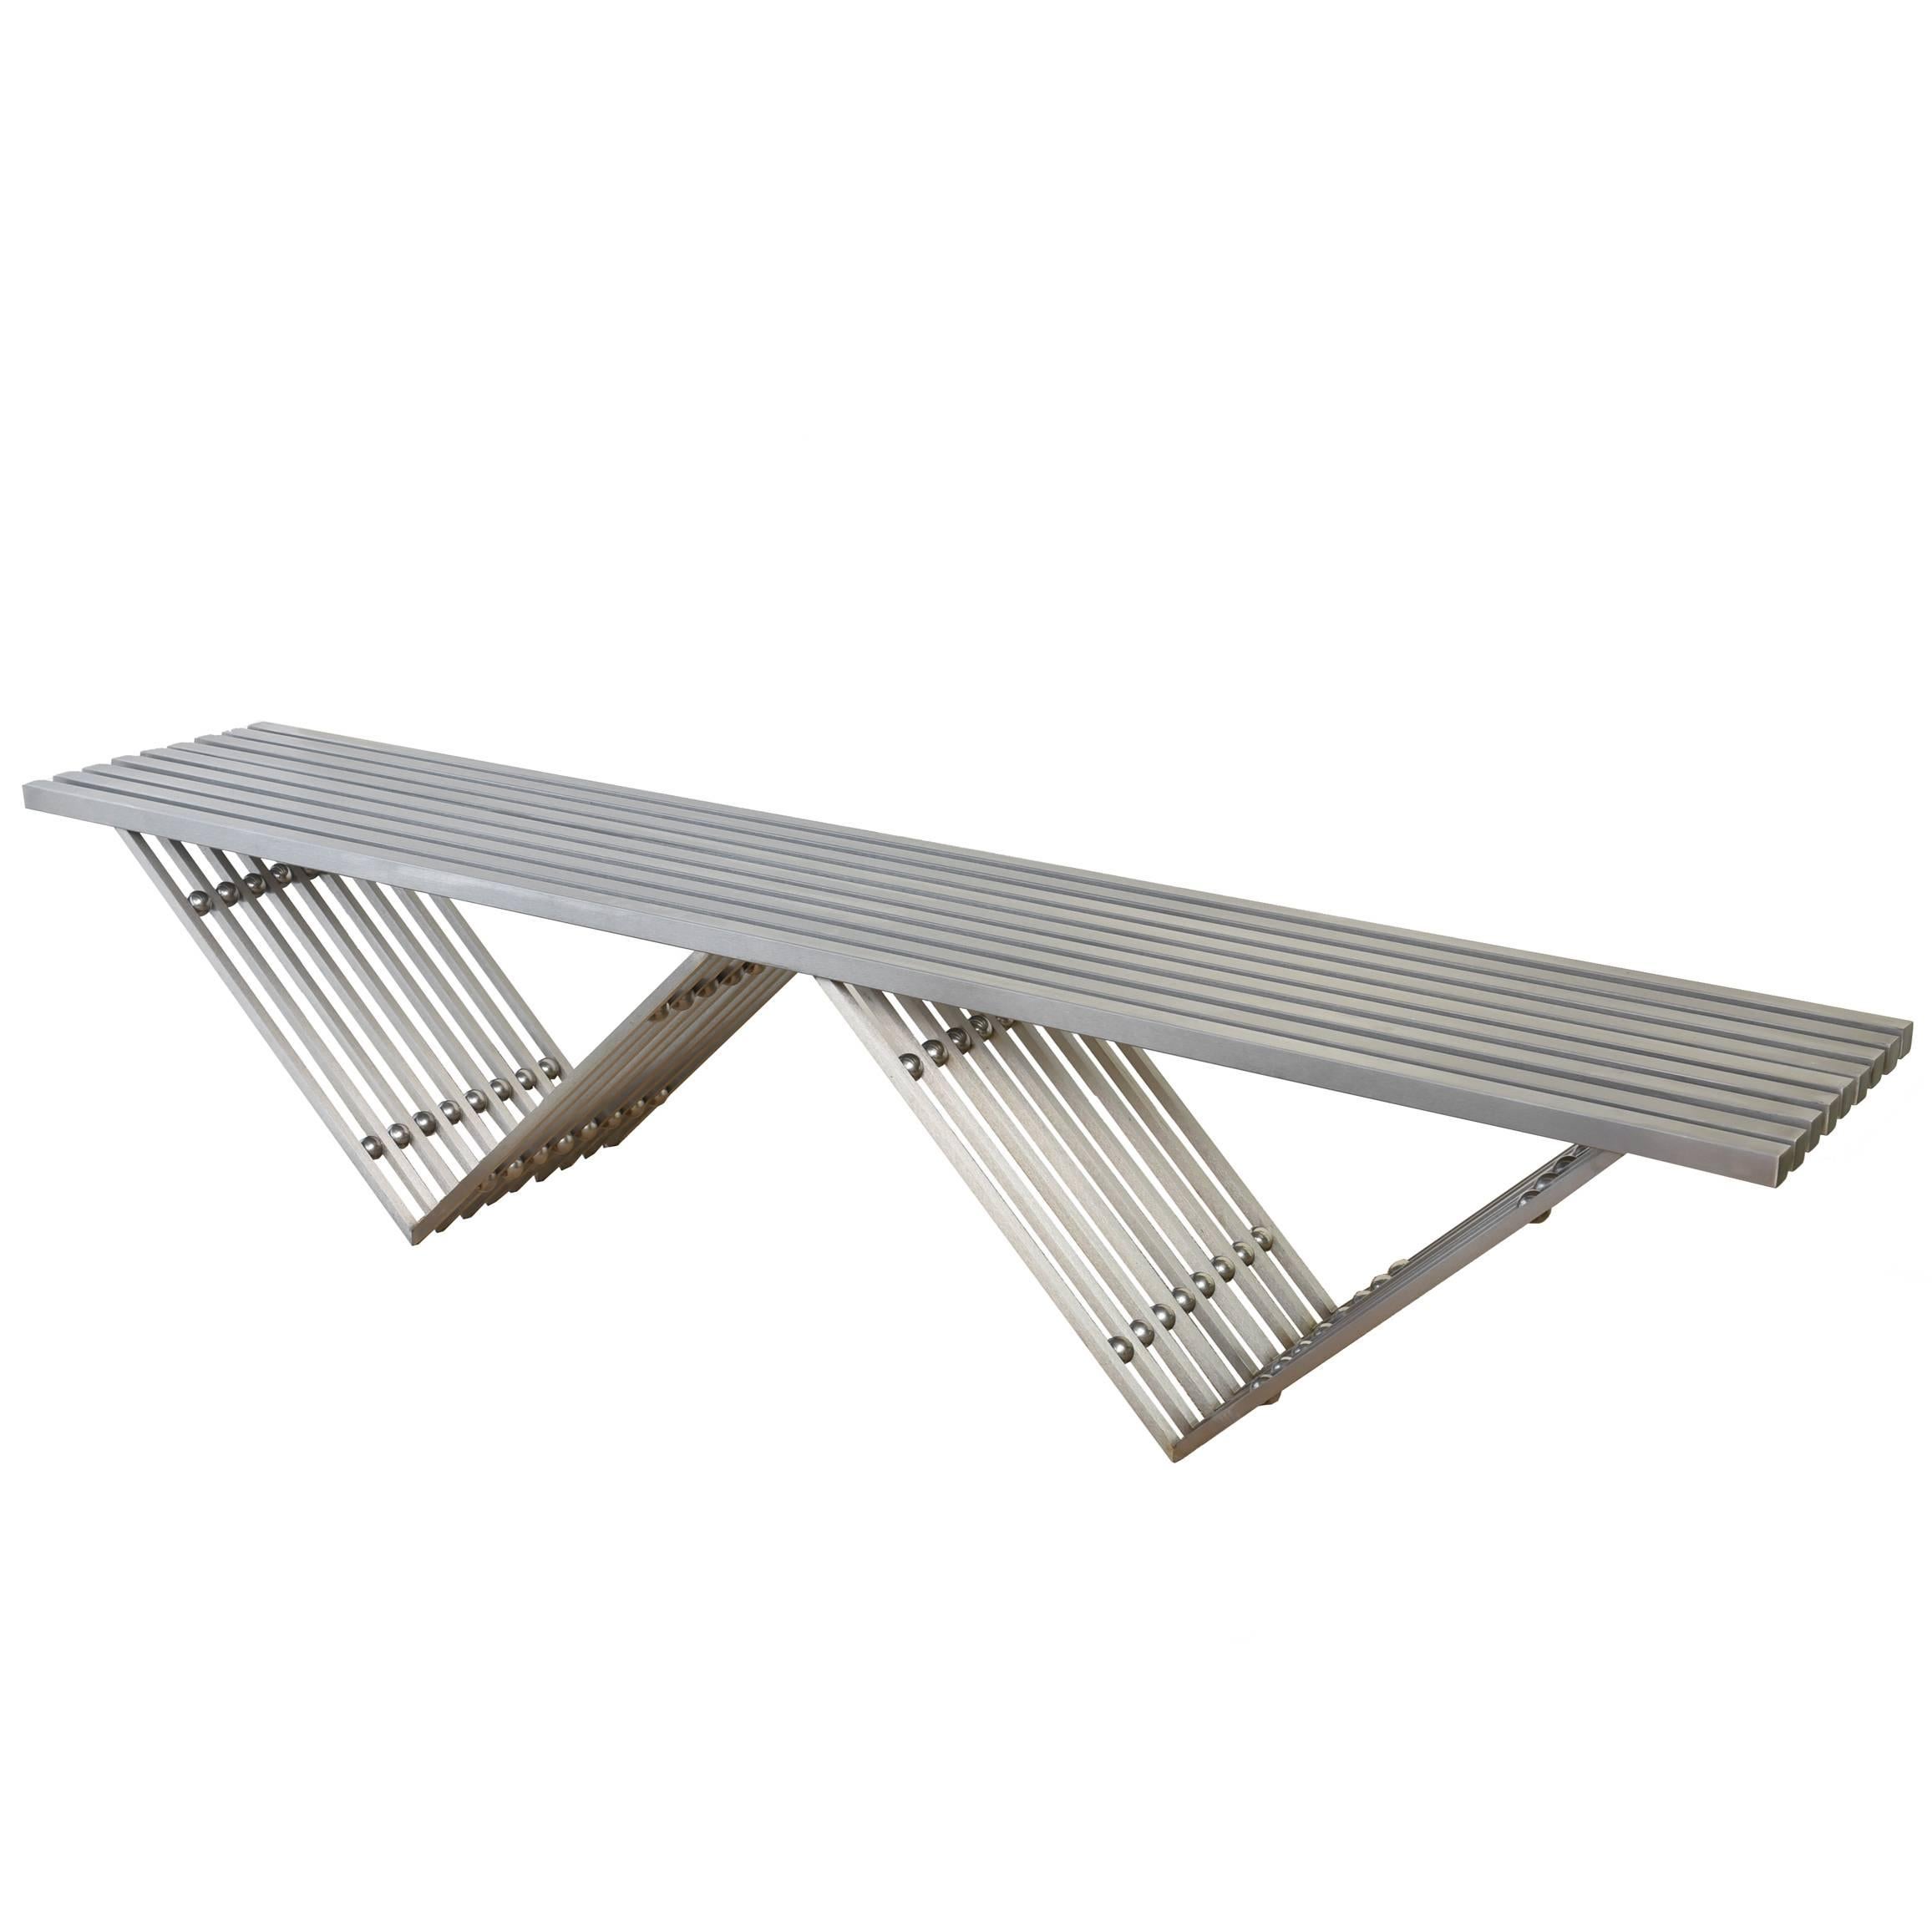  Architectural Stainless Steel Sculptural Bench Entitled The" Vestibule